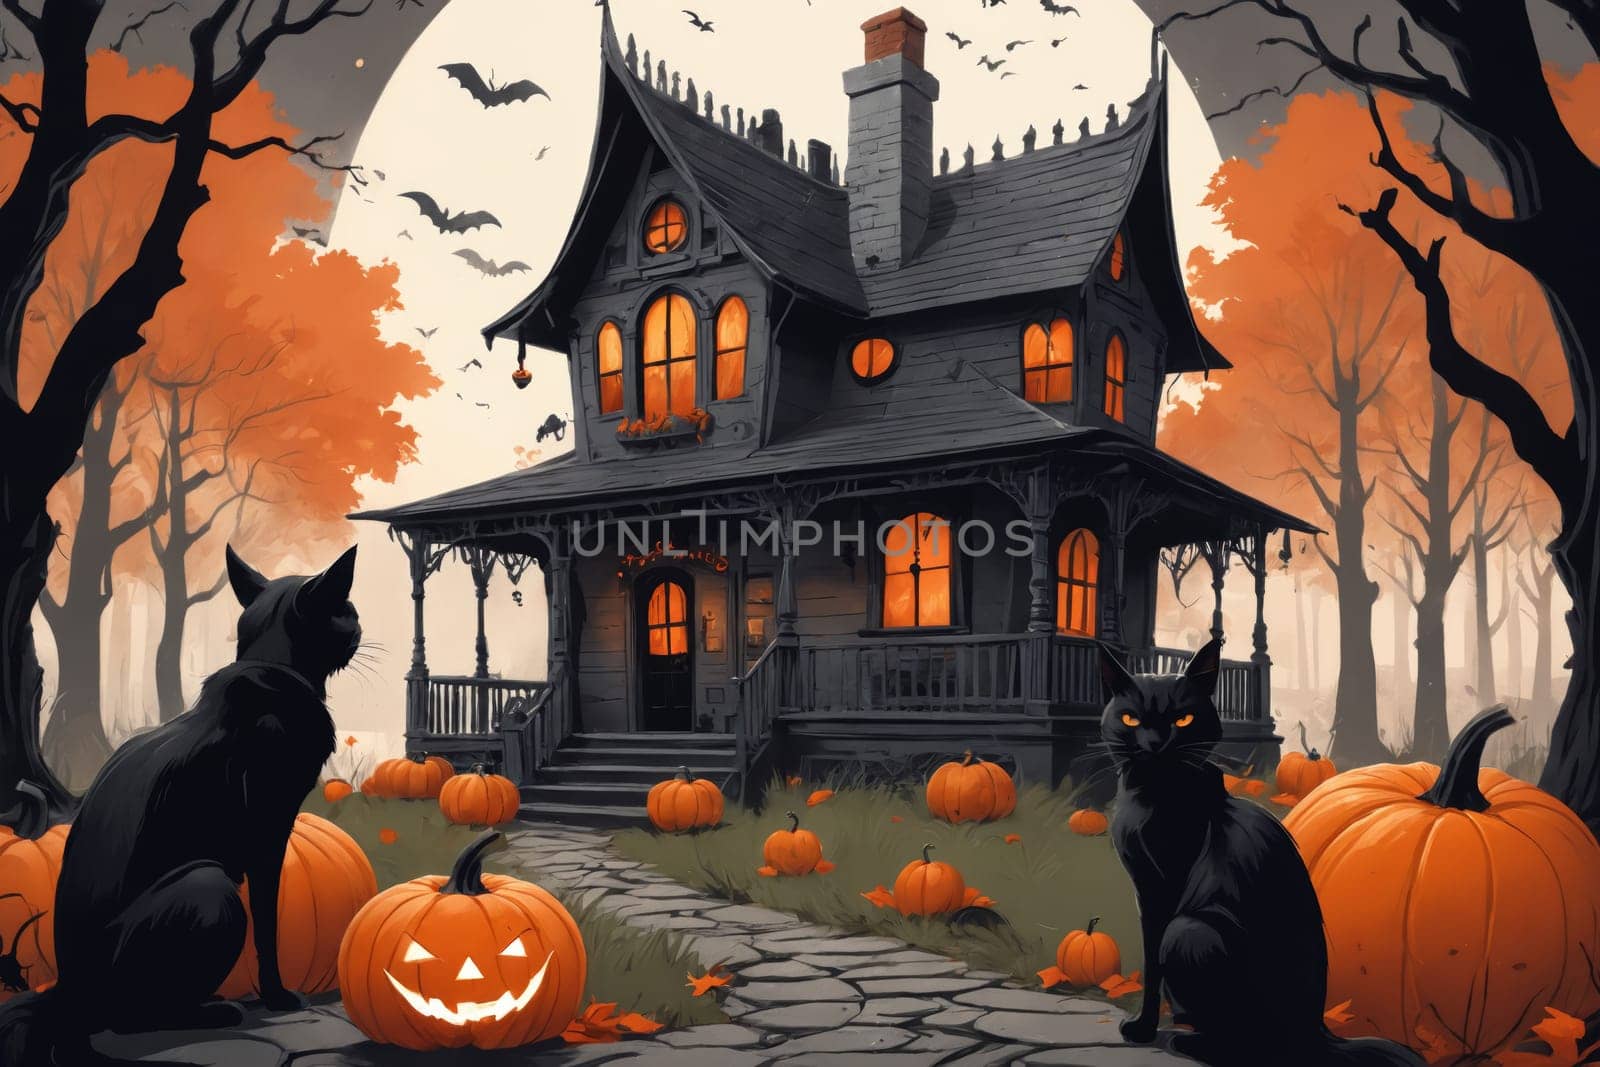 An enchanting Halloween-themed image showcasing a house adorned with festive decorations. The black cat in the foreground adds a classic spooky touch.